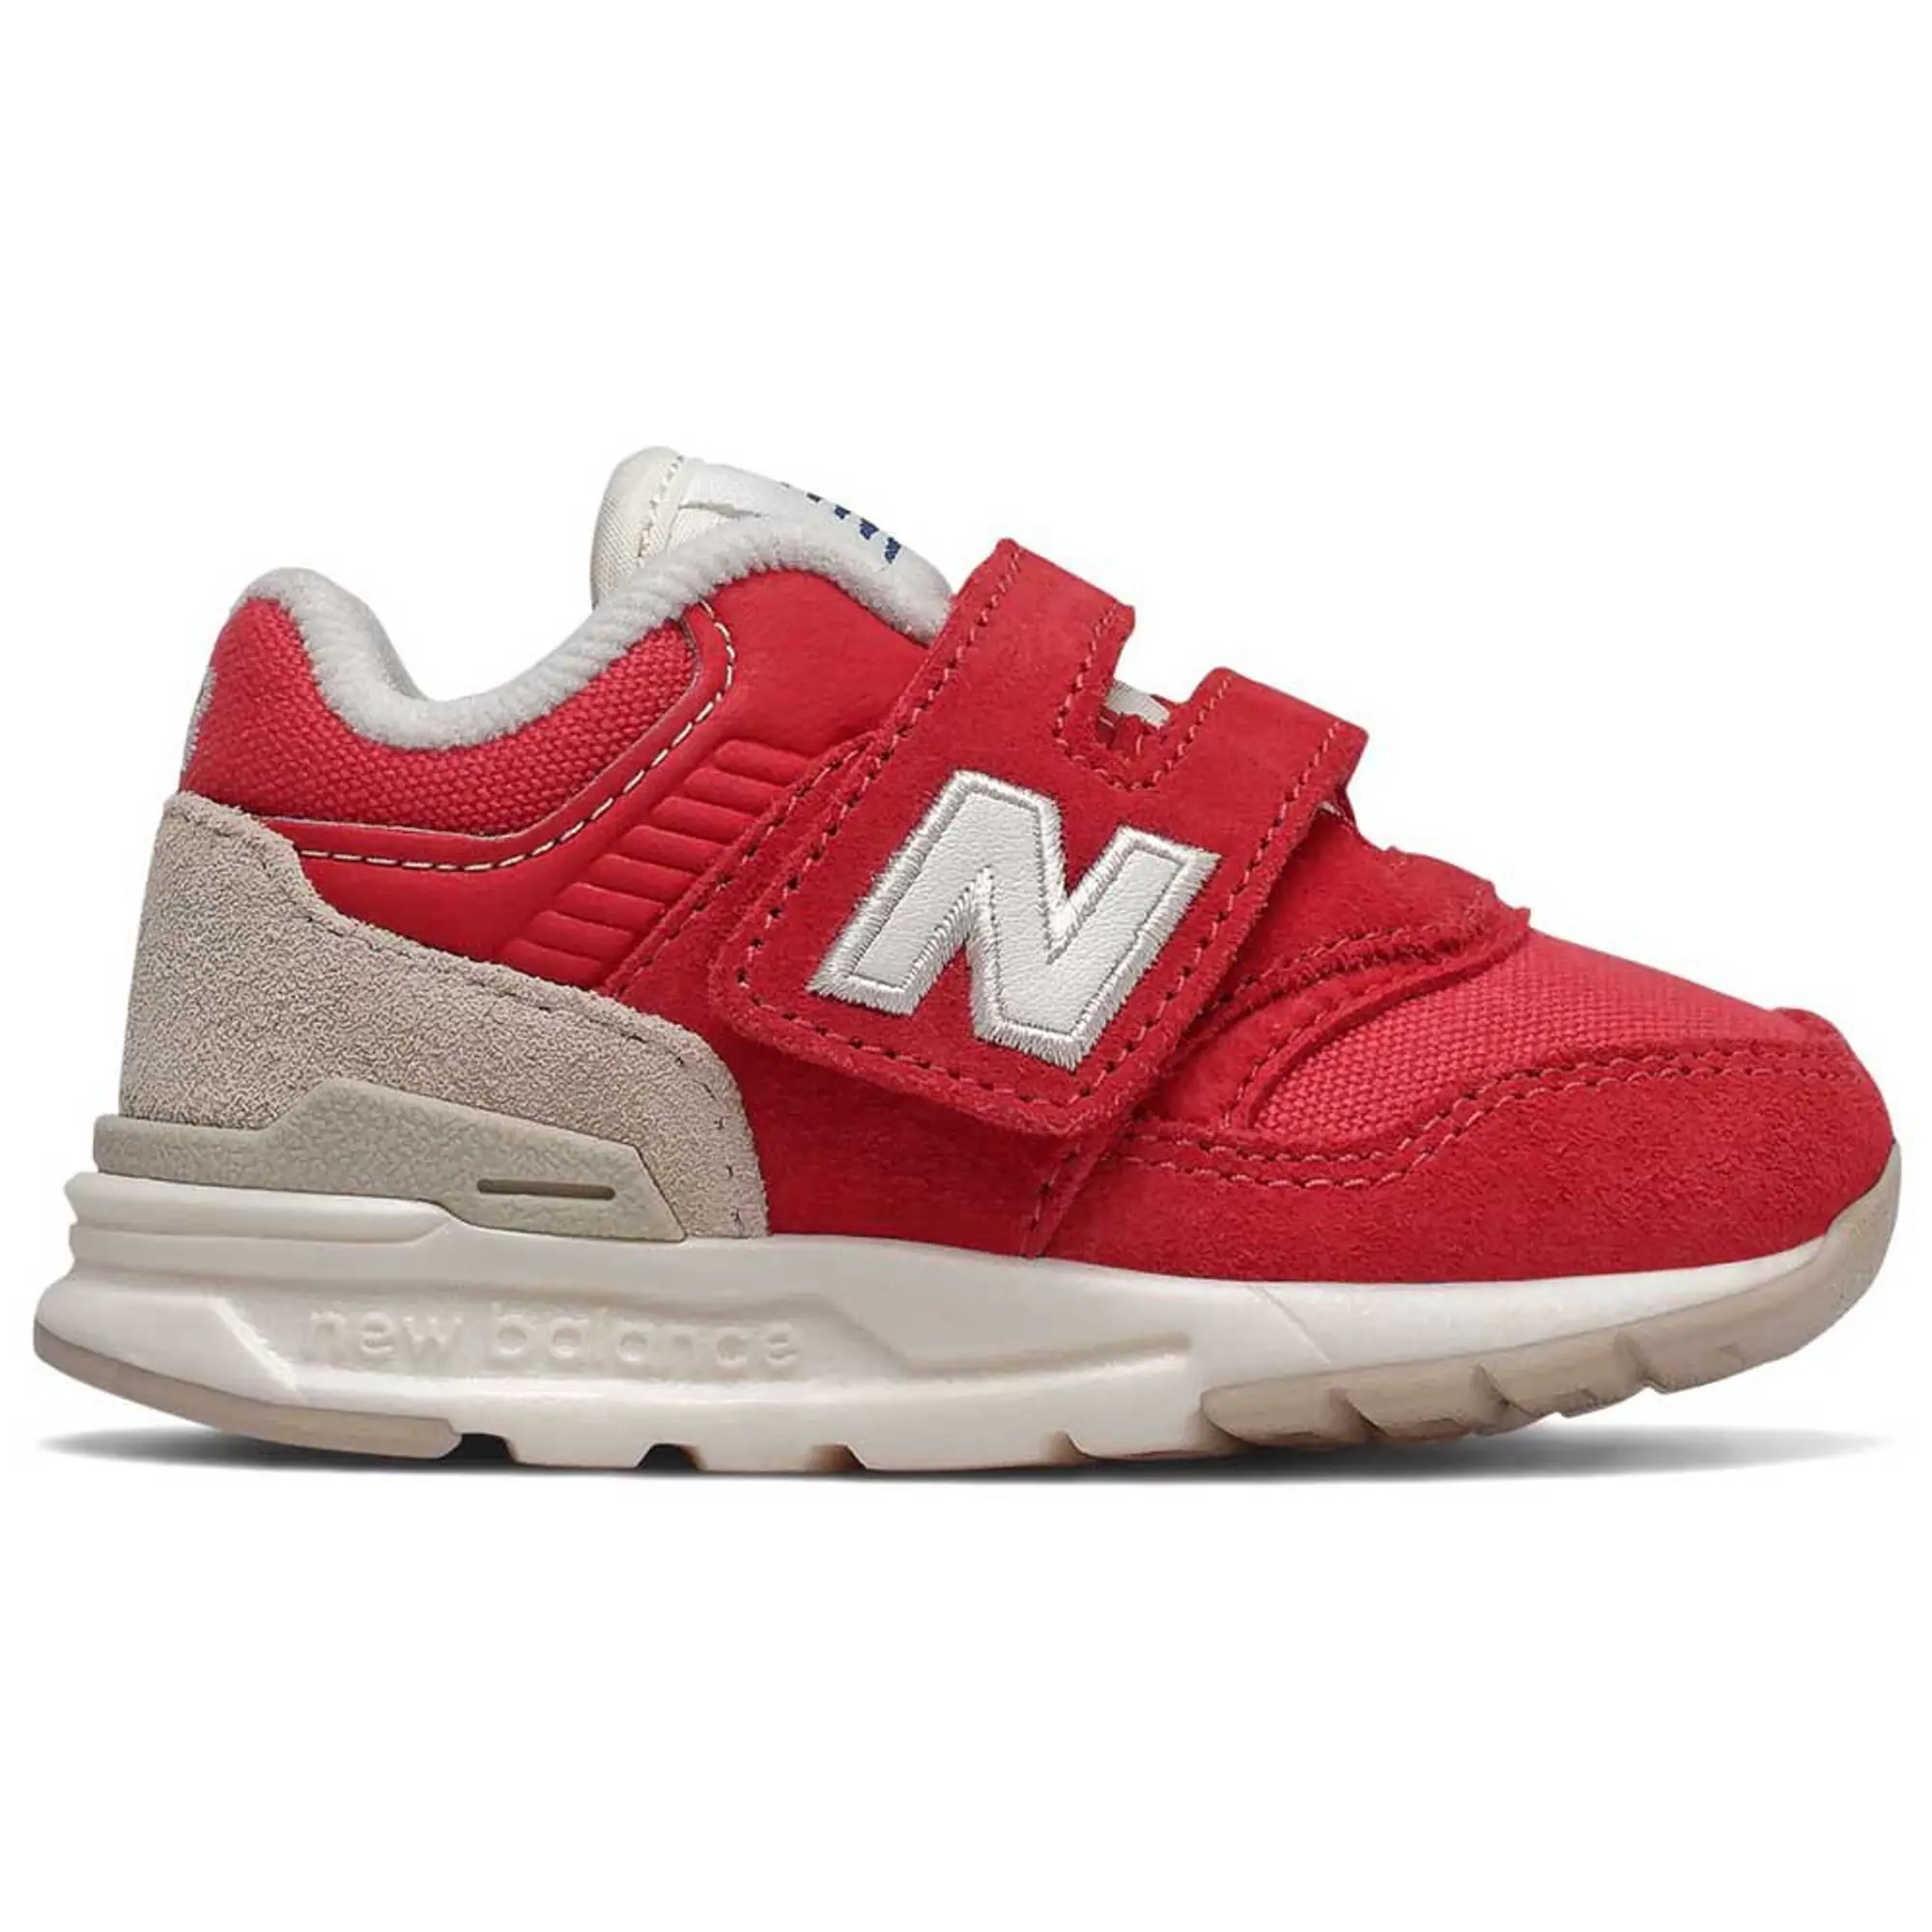 New Balance 997 Classic Red Sneakers For Infants | Iz997Hbs | Footy.Com